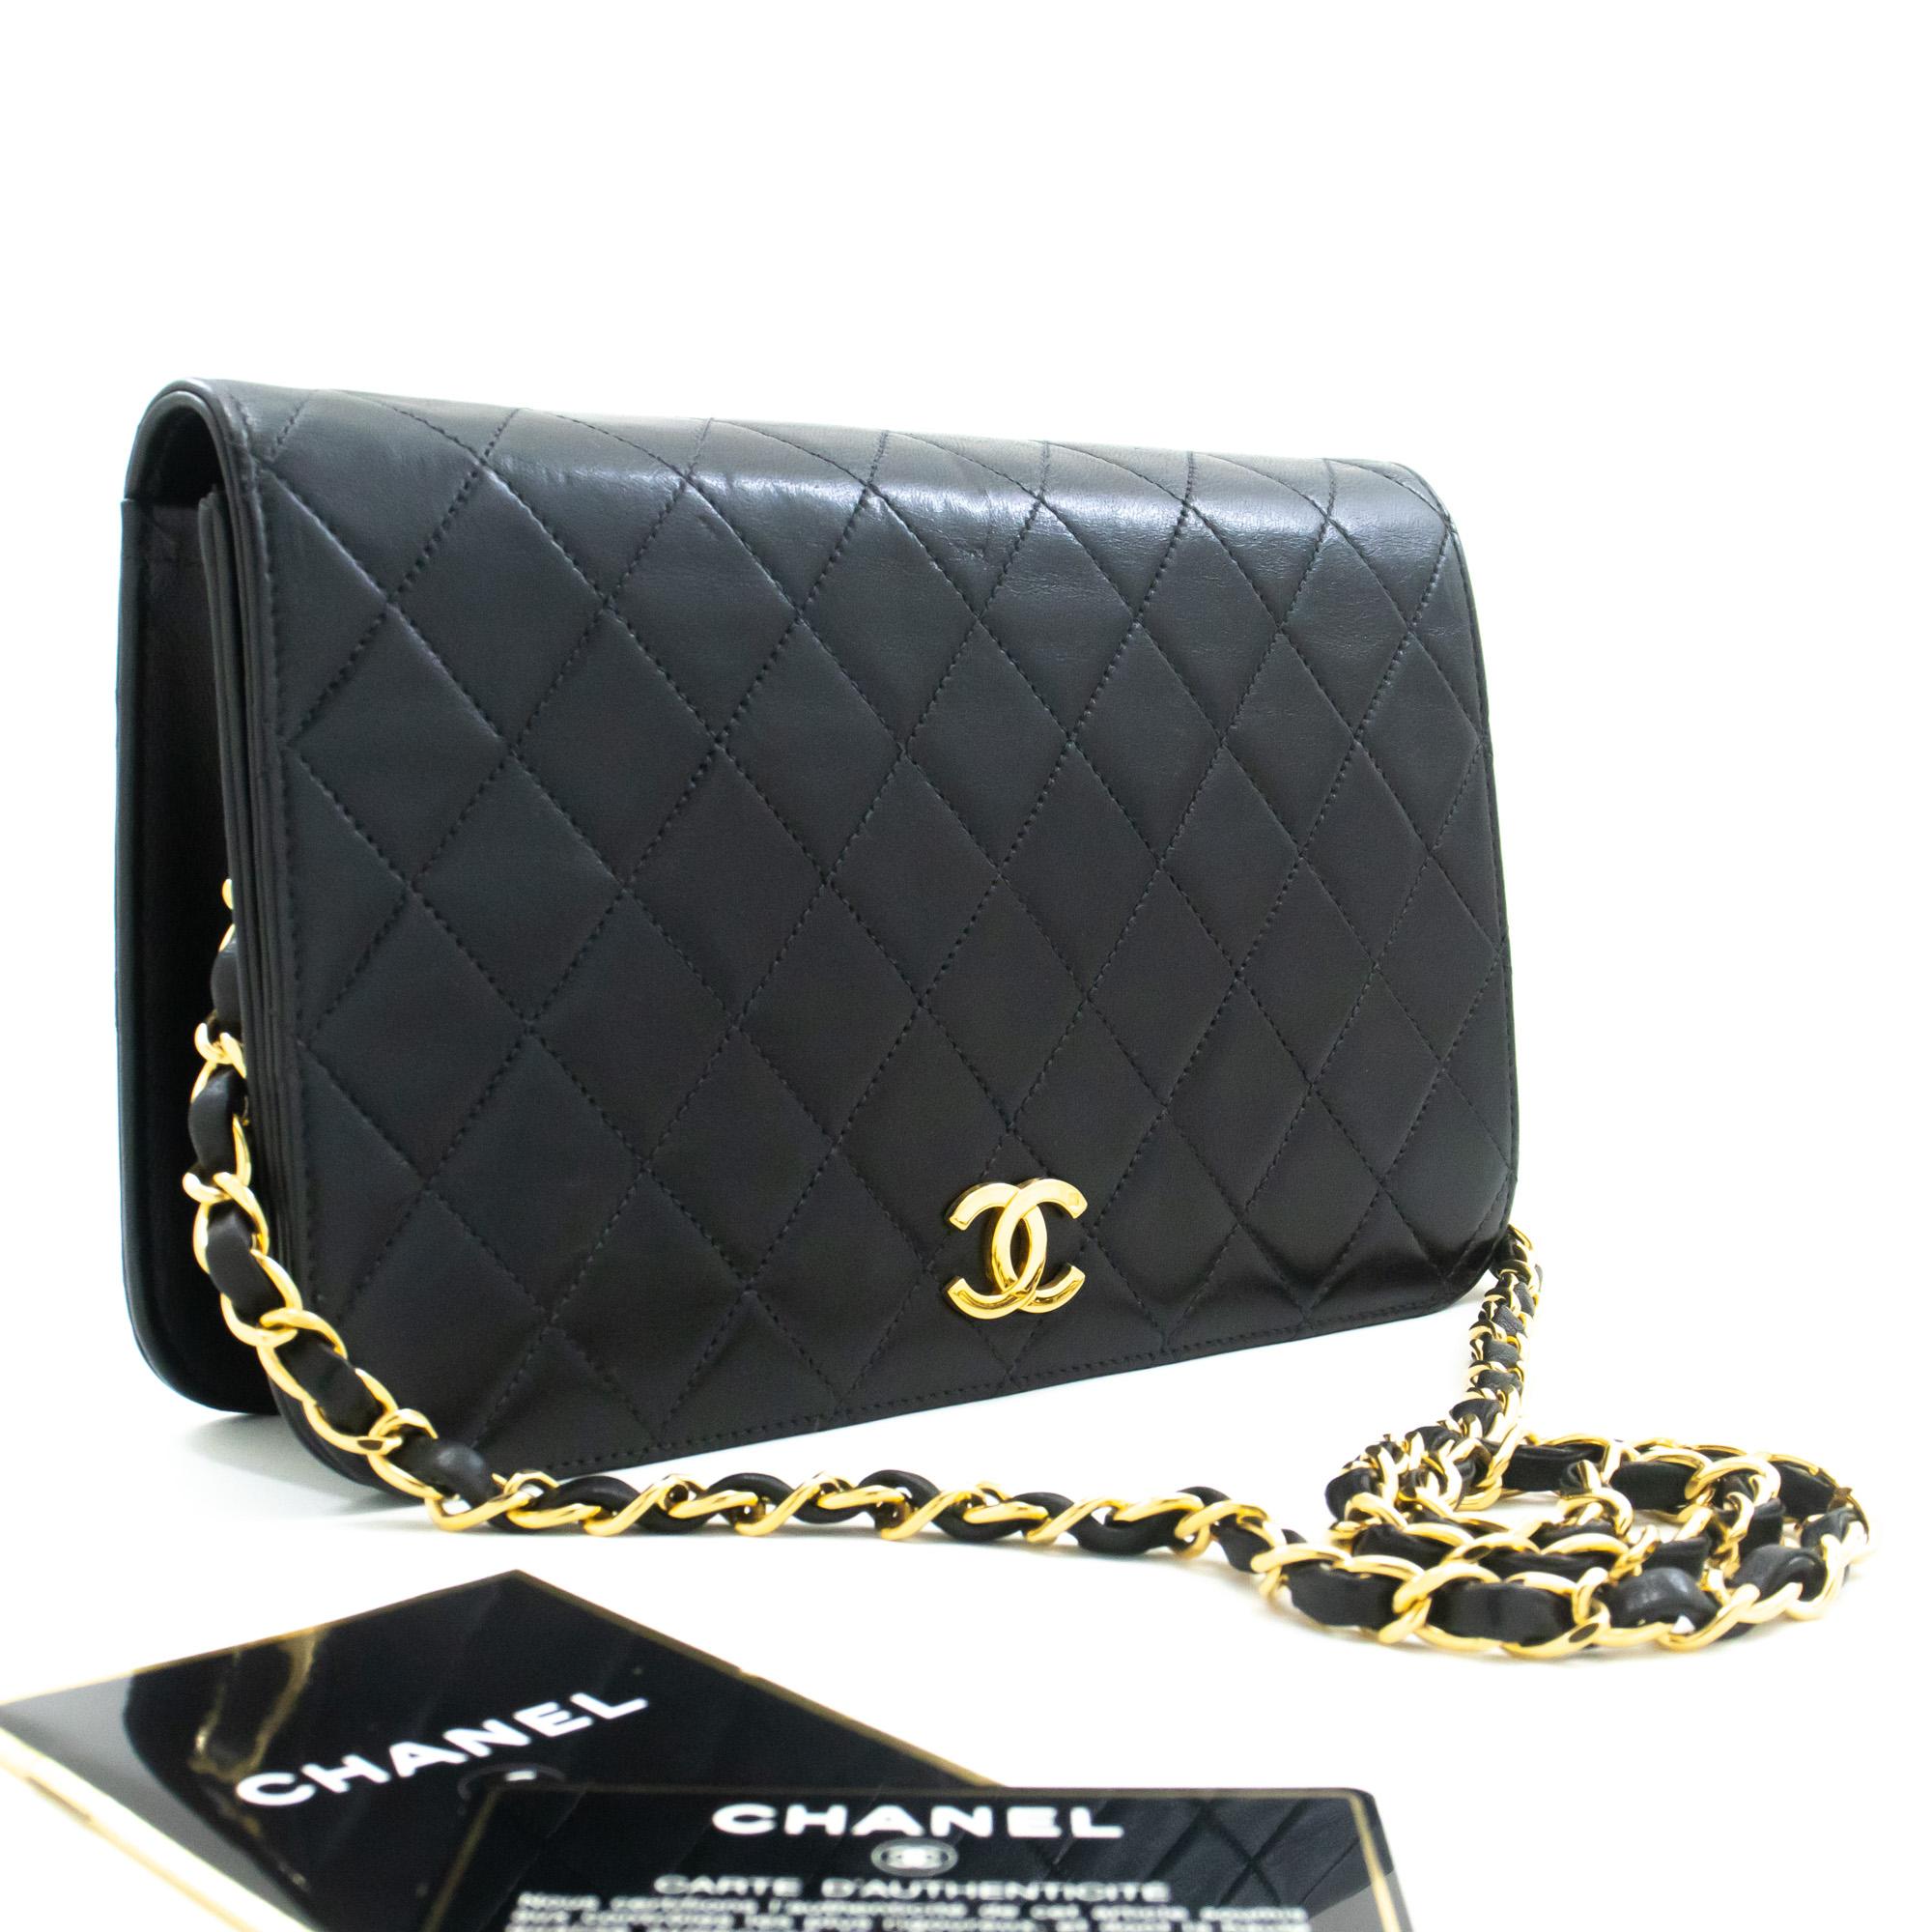 An authentic CHANEL Full Flap Chain Shoulder Bag Clutch Black Quilted made of black Lambskin. The color is Black. The outside material is Leather. The pattern is Solid. This item is Vintage / Classic. The year of manufacture would be 2000-2 0 0 2